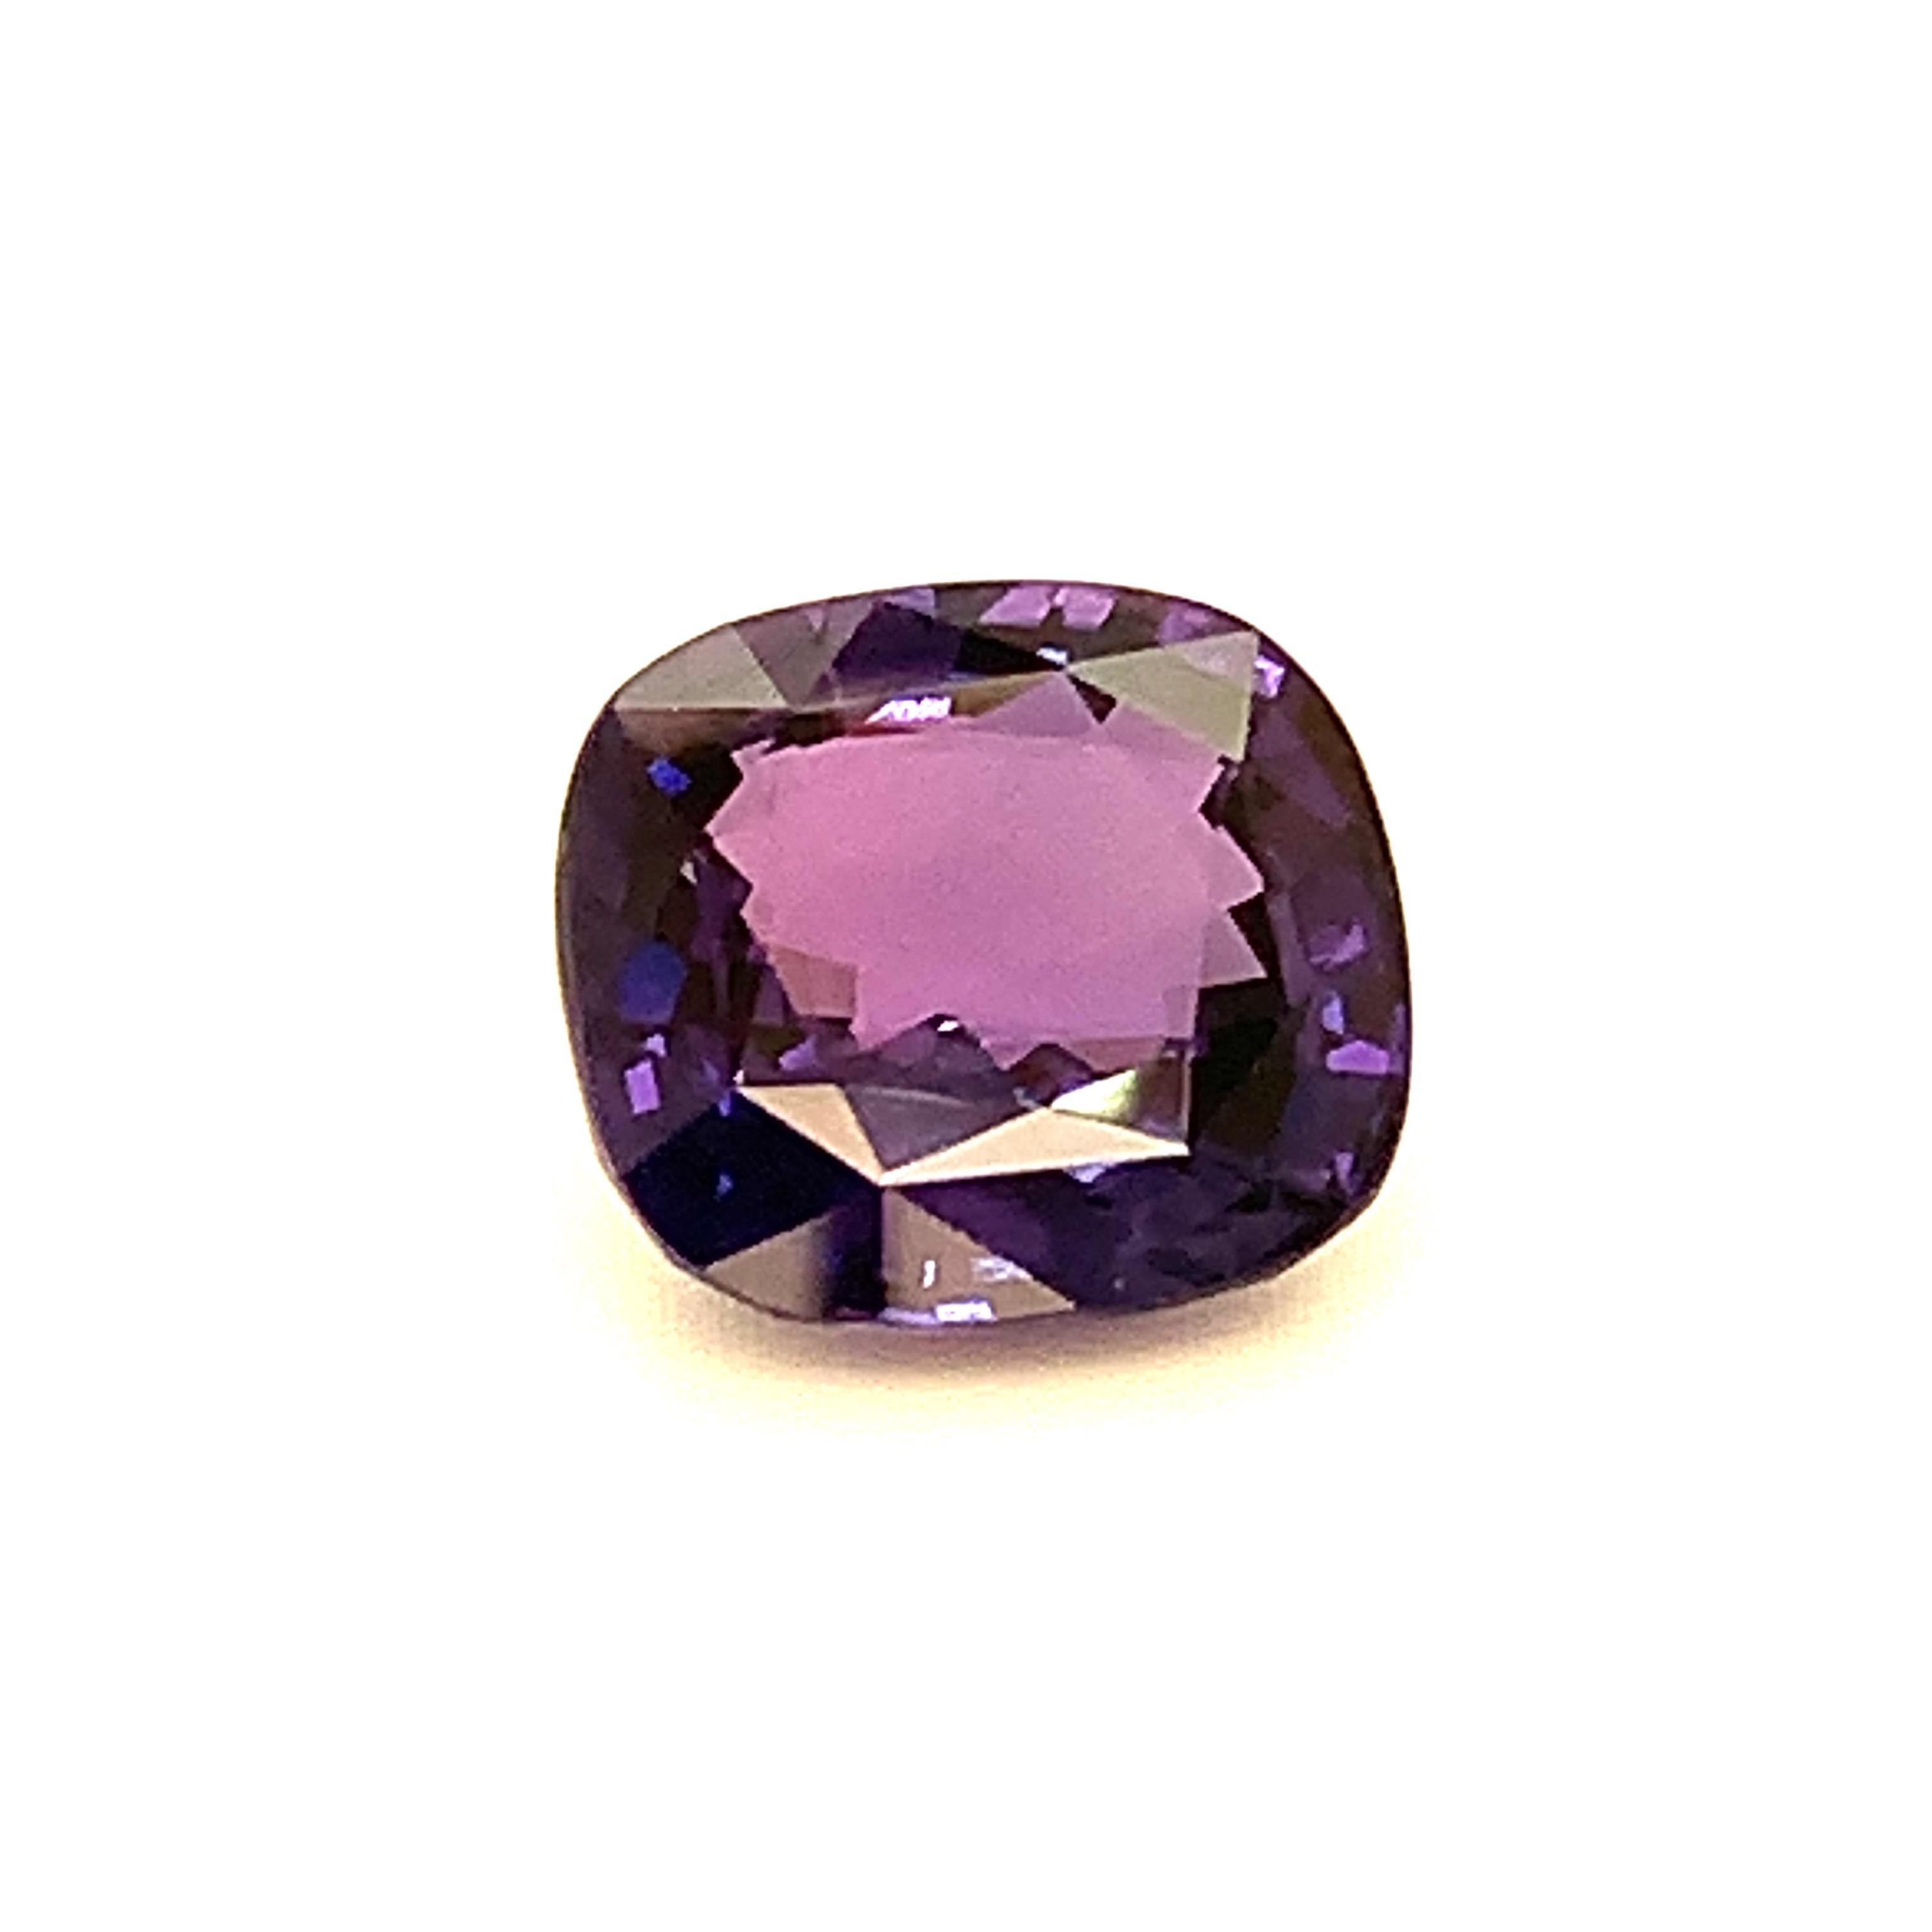 6.76 Carat Color Change Sapphire Cushion, Unset Loose Gemstone, GIA Certified 7